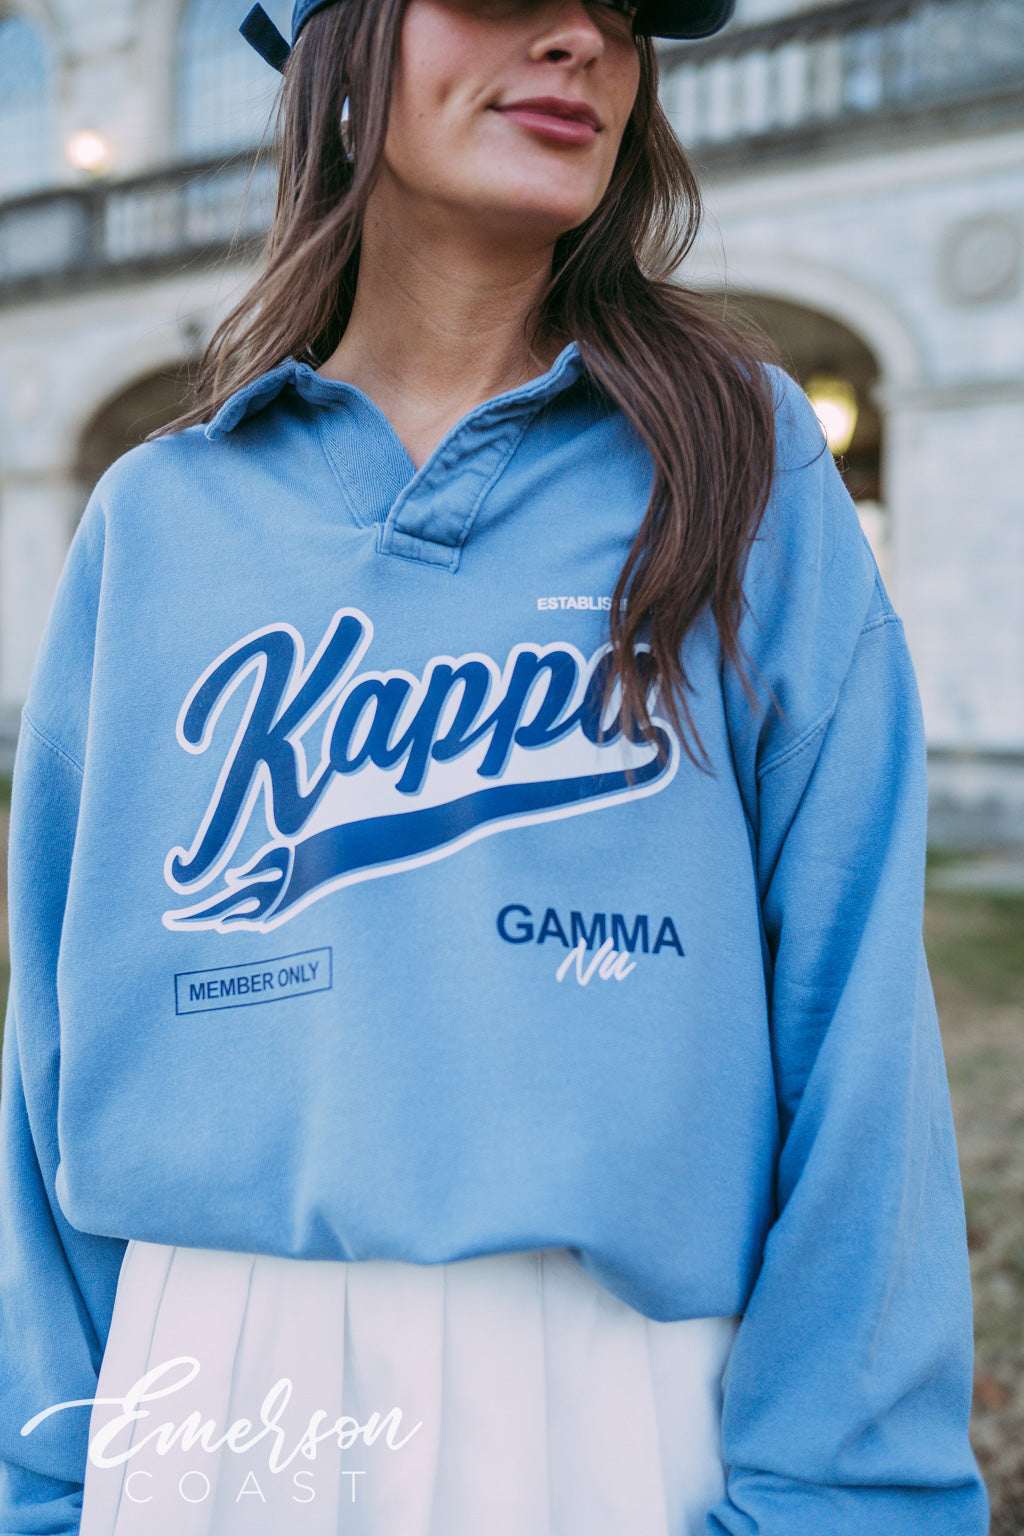 Kappa Members Only Oversized Collared Crew